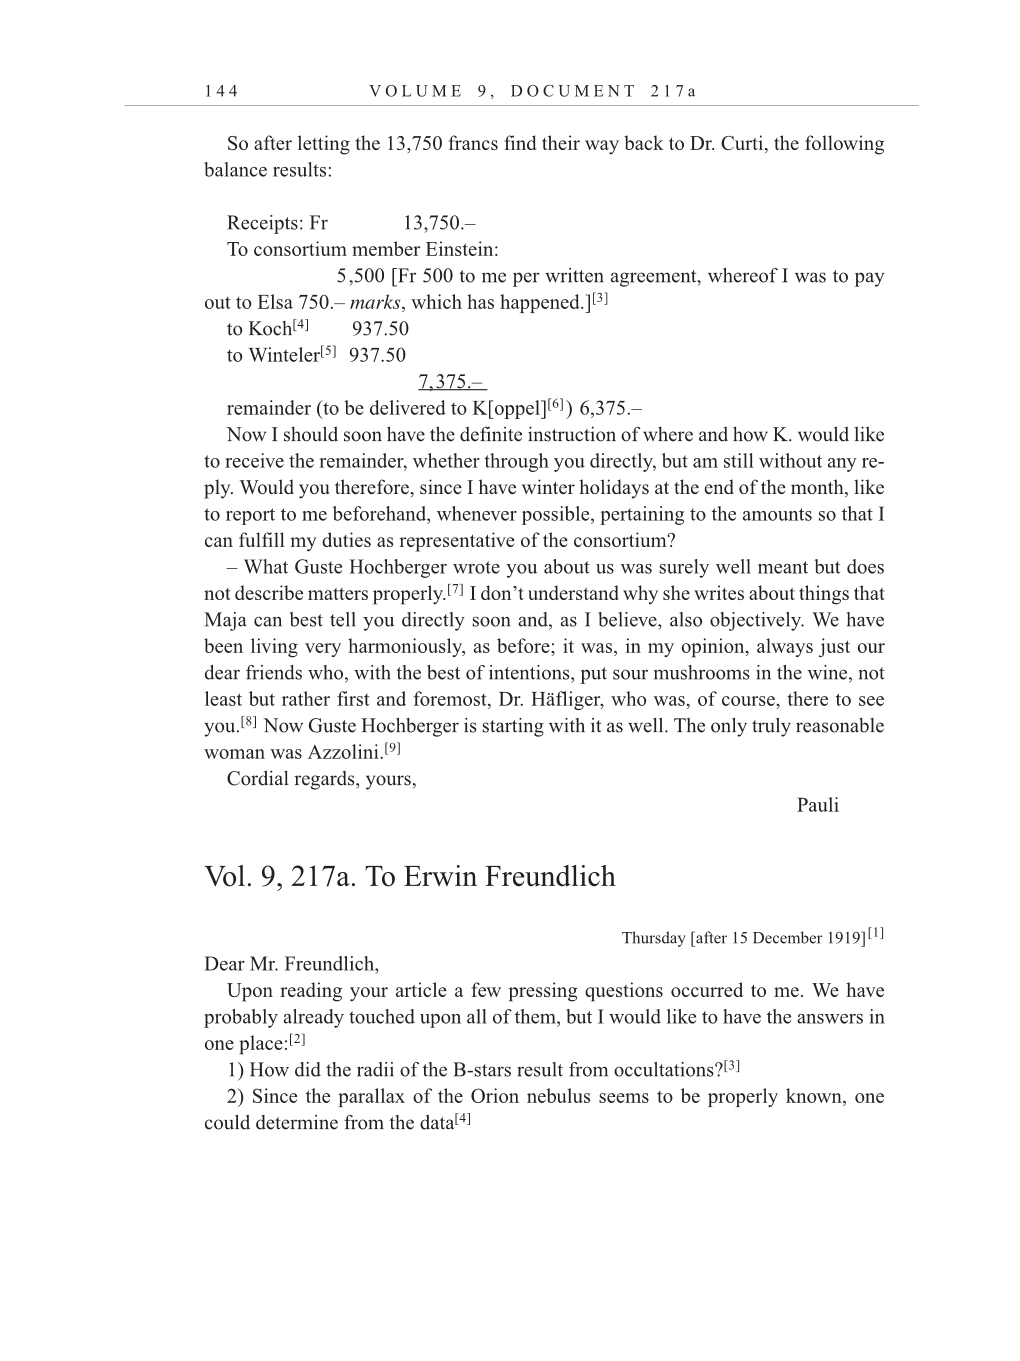 Volume 10: The Berlin Years: Correspondence, May-December 1920, and Supplementary Correspondence, 1909-1920 (English translation supplement) page 144